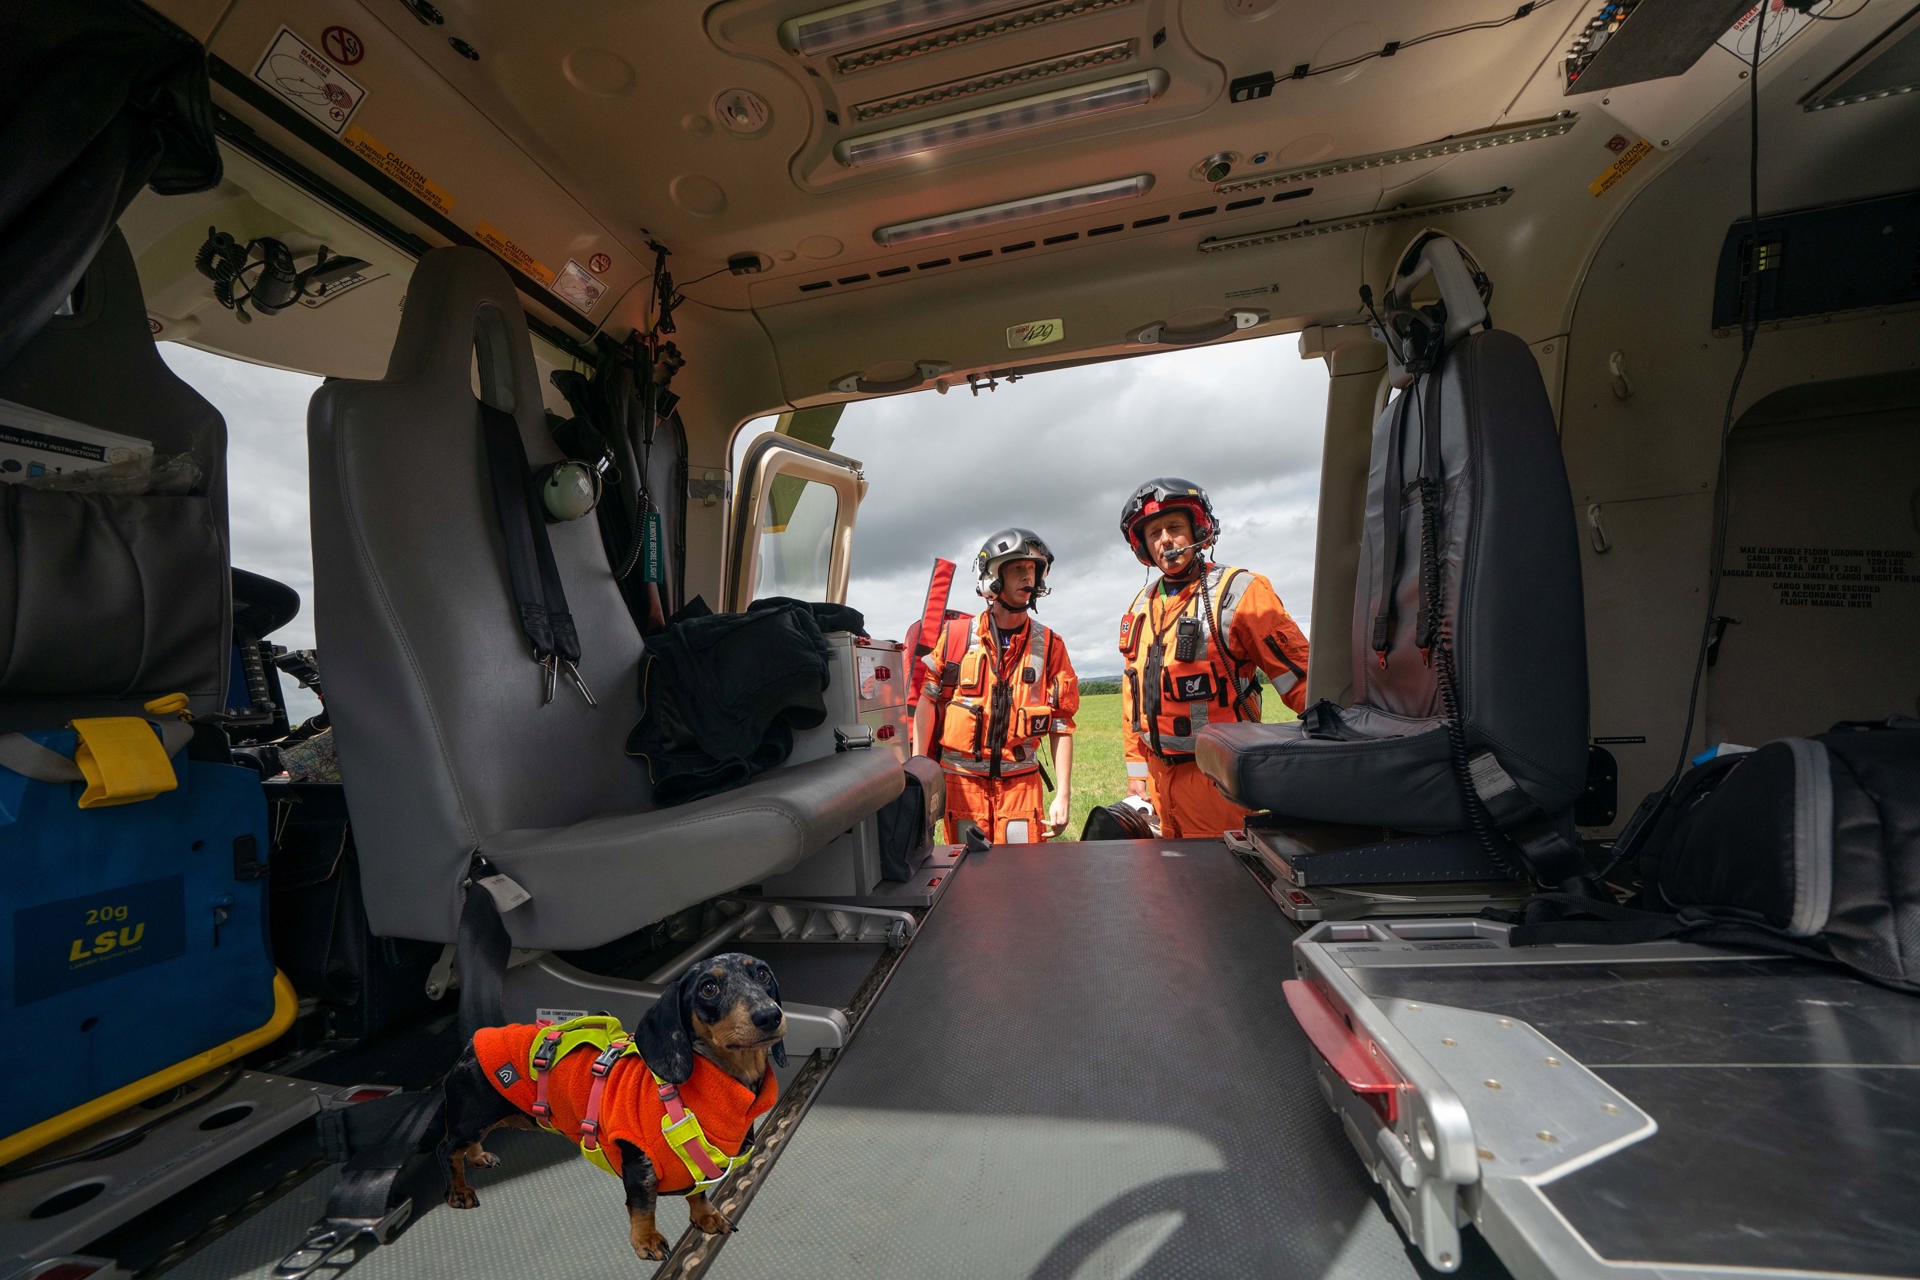 A photoshopped Dachshund wearing an orange flight suit in Wiltshire Air Ambulance's helicopter with two paramedics looking in